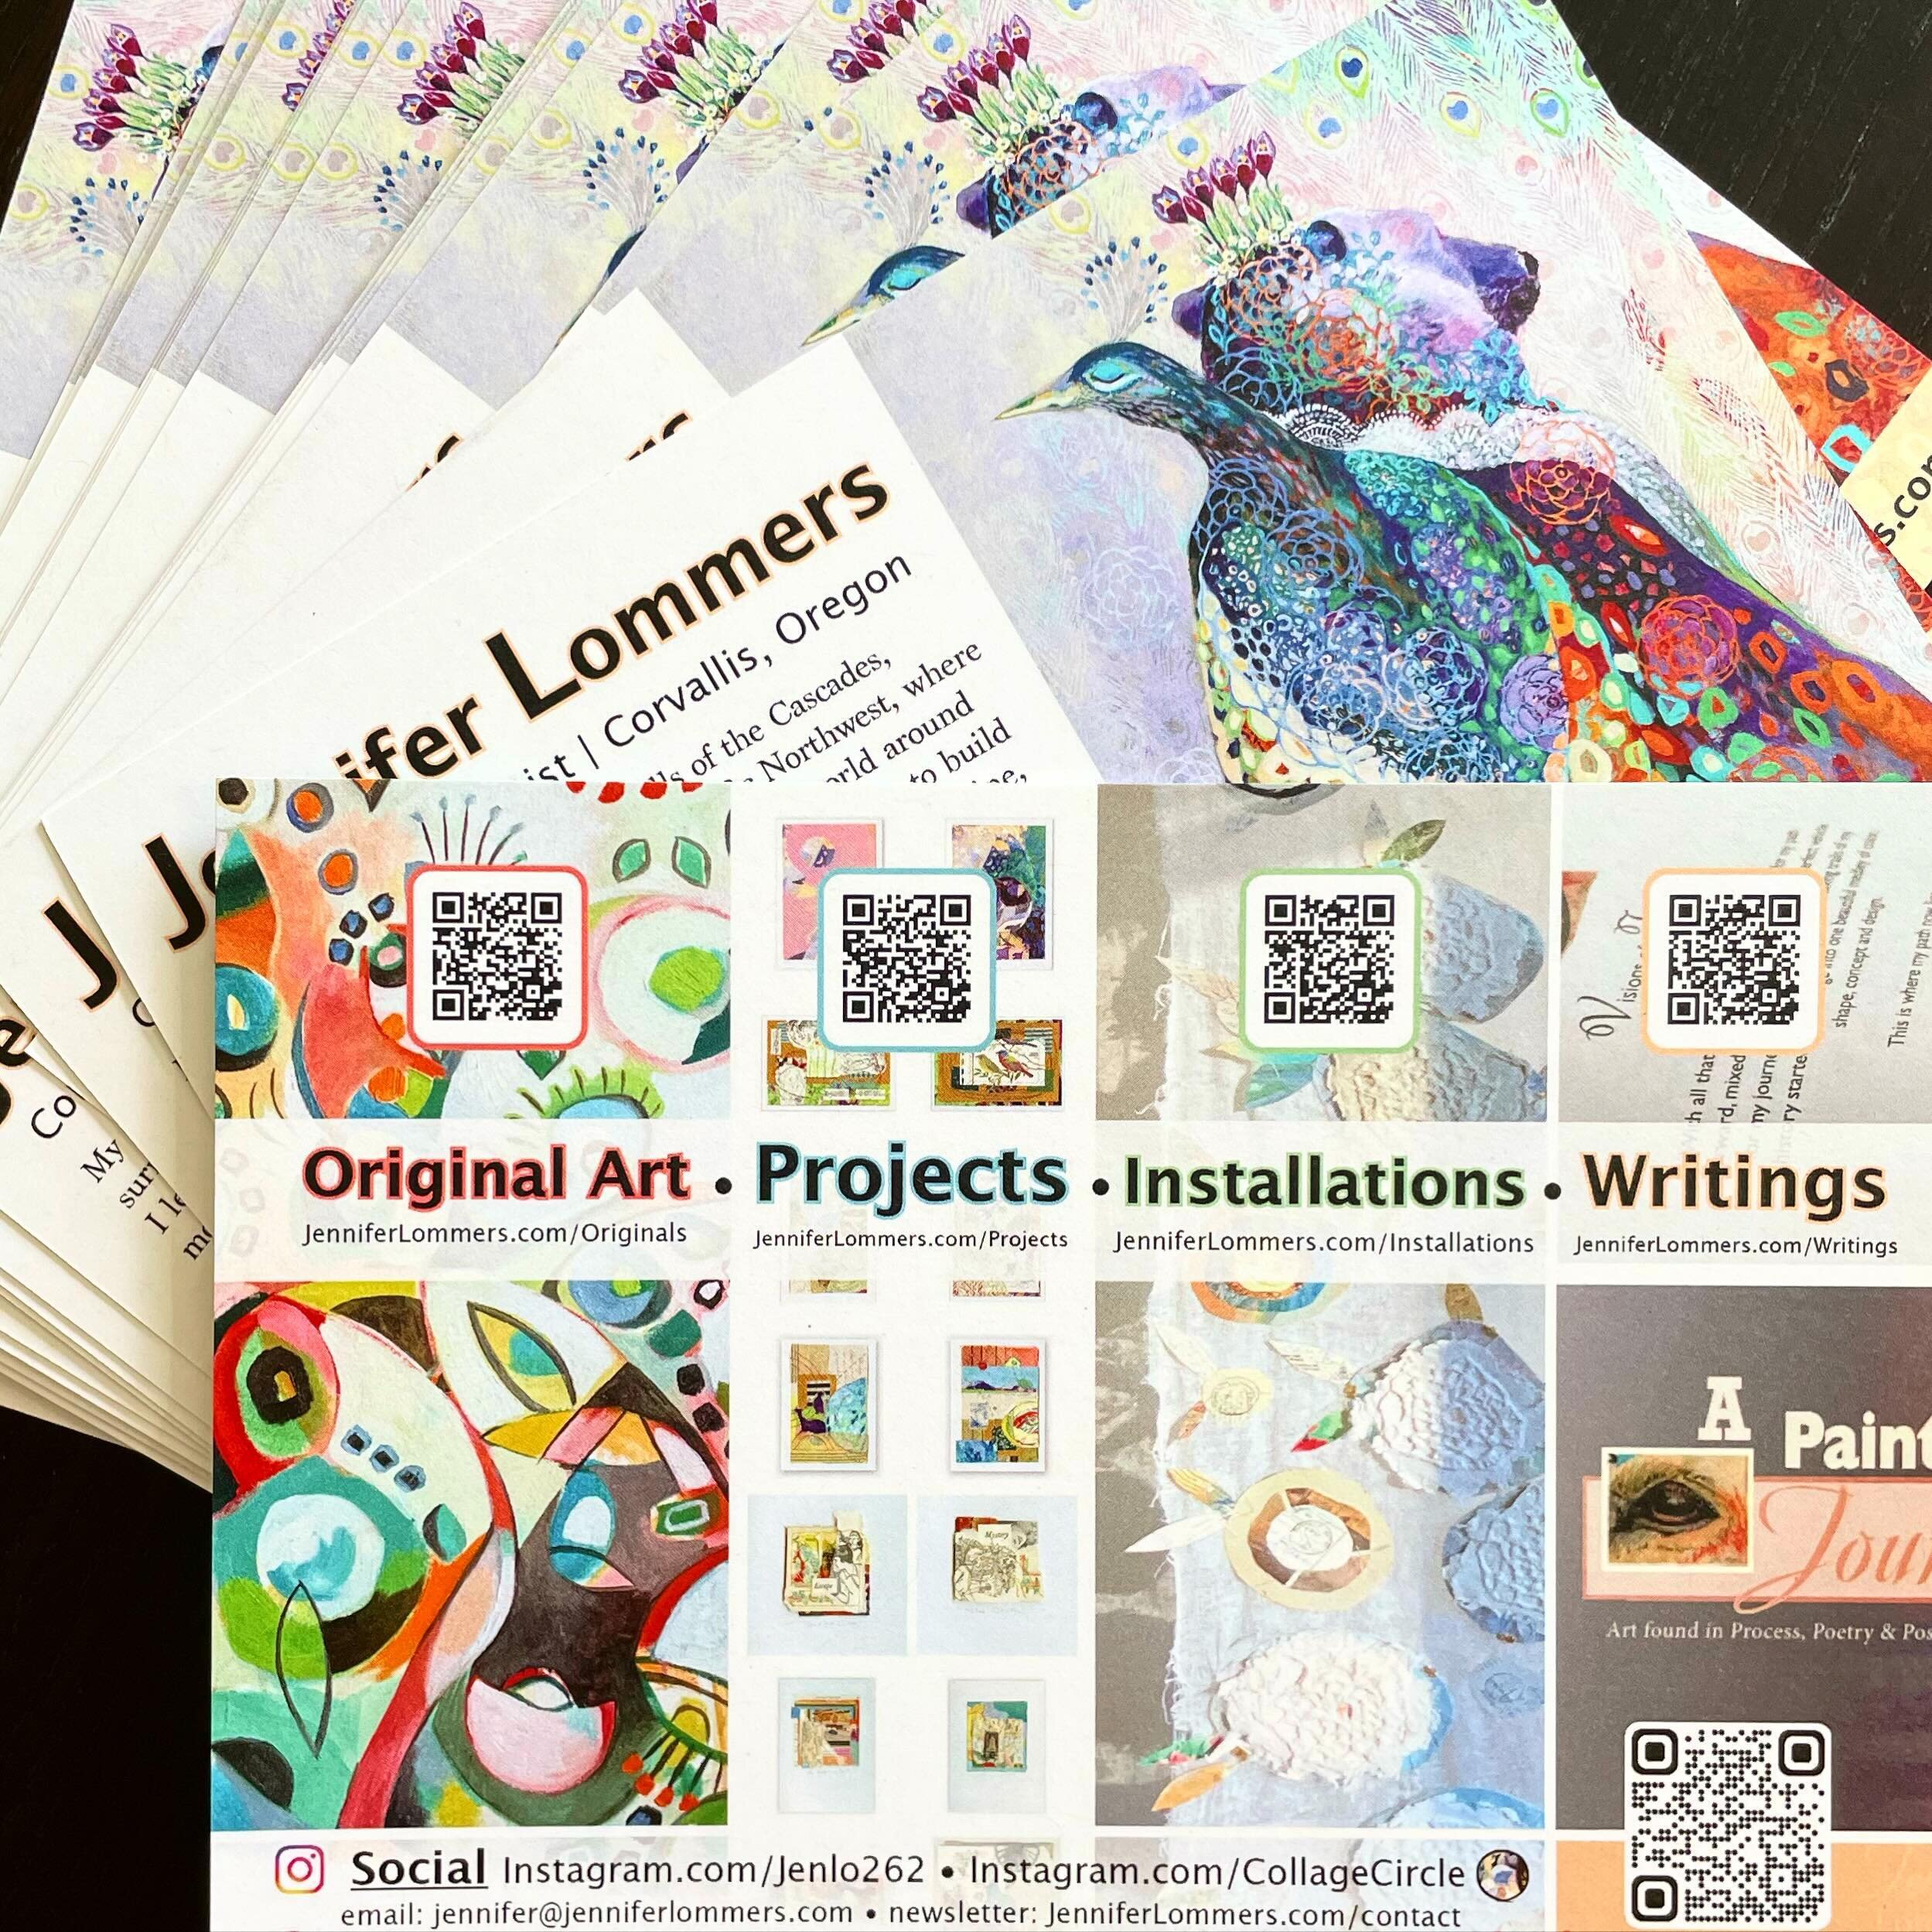 Excited to receive my new promo postcards from @jukeboxprint - printed on Mohawk Recycled Paper! I&rsquo;m looking forward to handing these out to share the different aspects of my art-making during the @northsideopenstudiostour - April 20-21 - thank